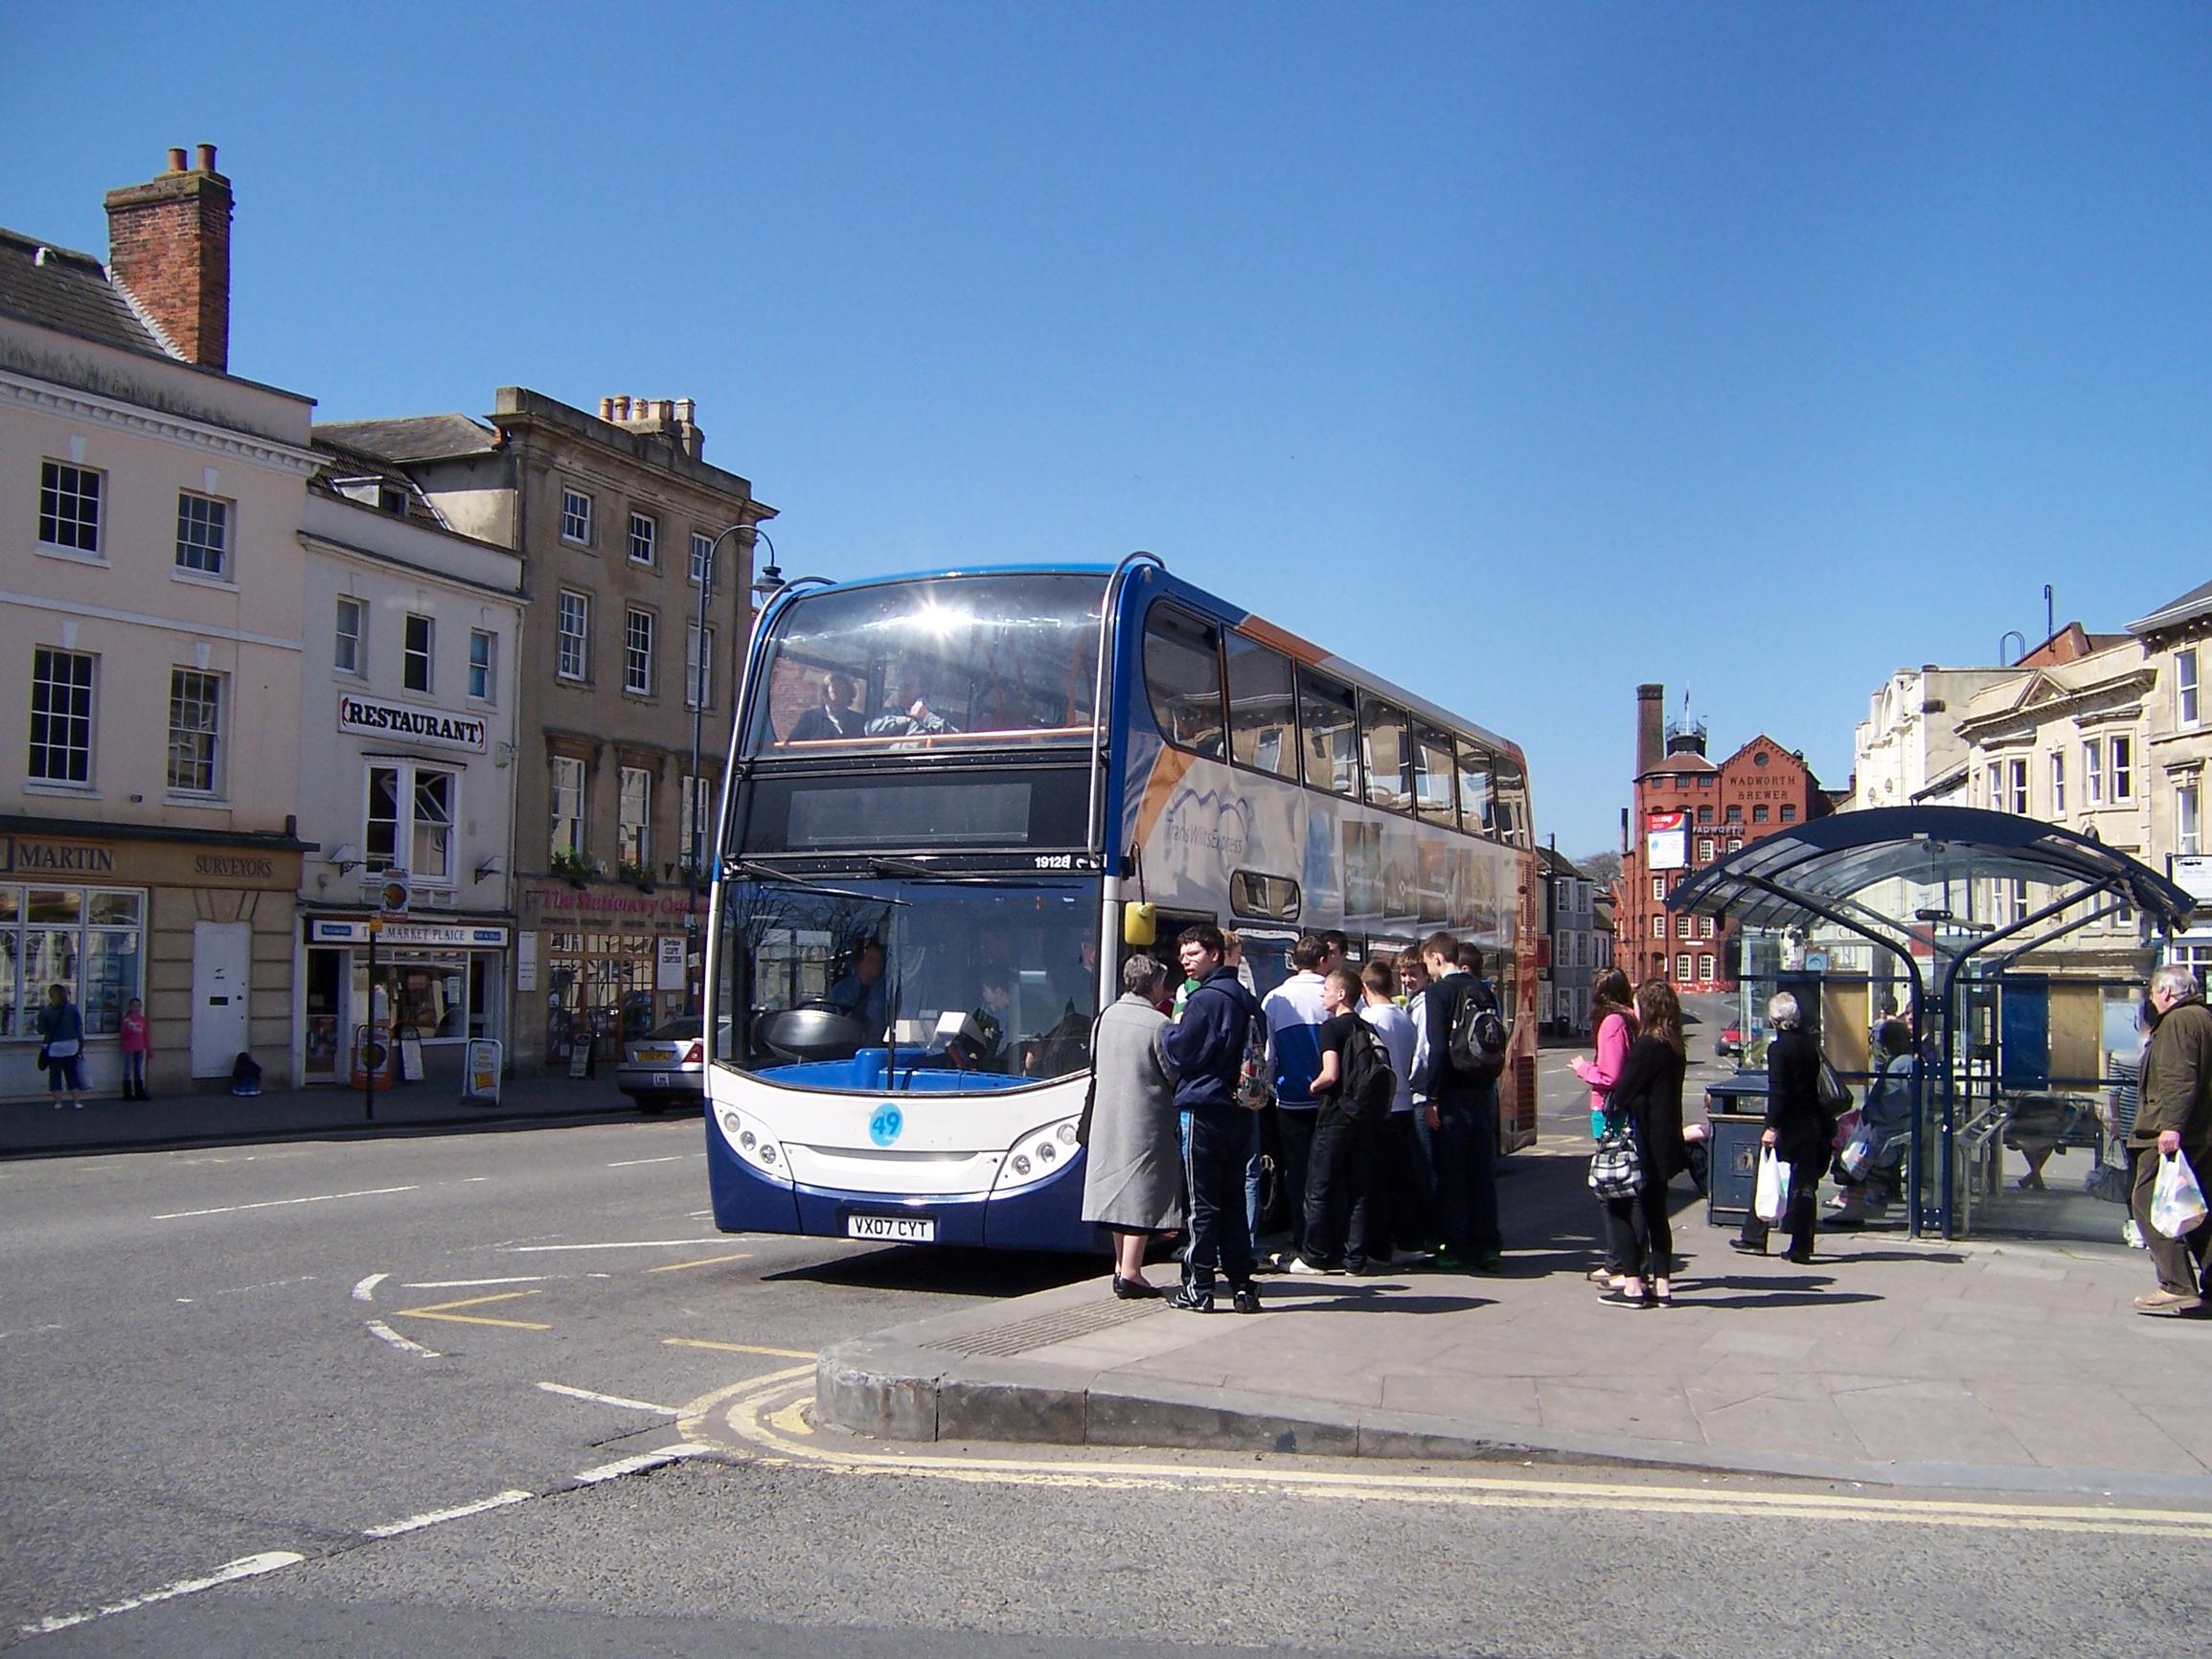 There have been 97 million fewer bus journeys in the shire counties compared with 10 years ago